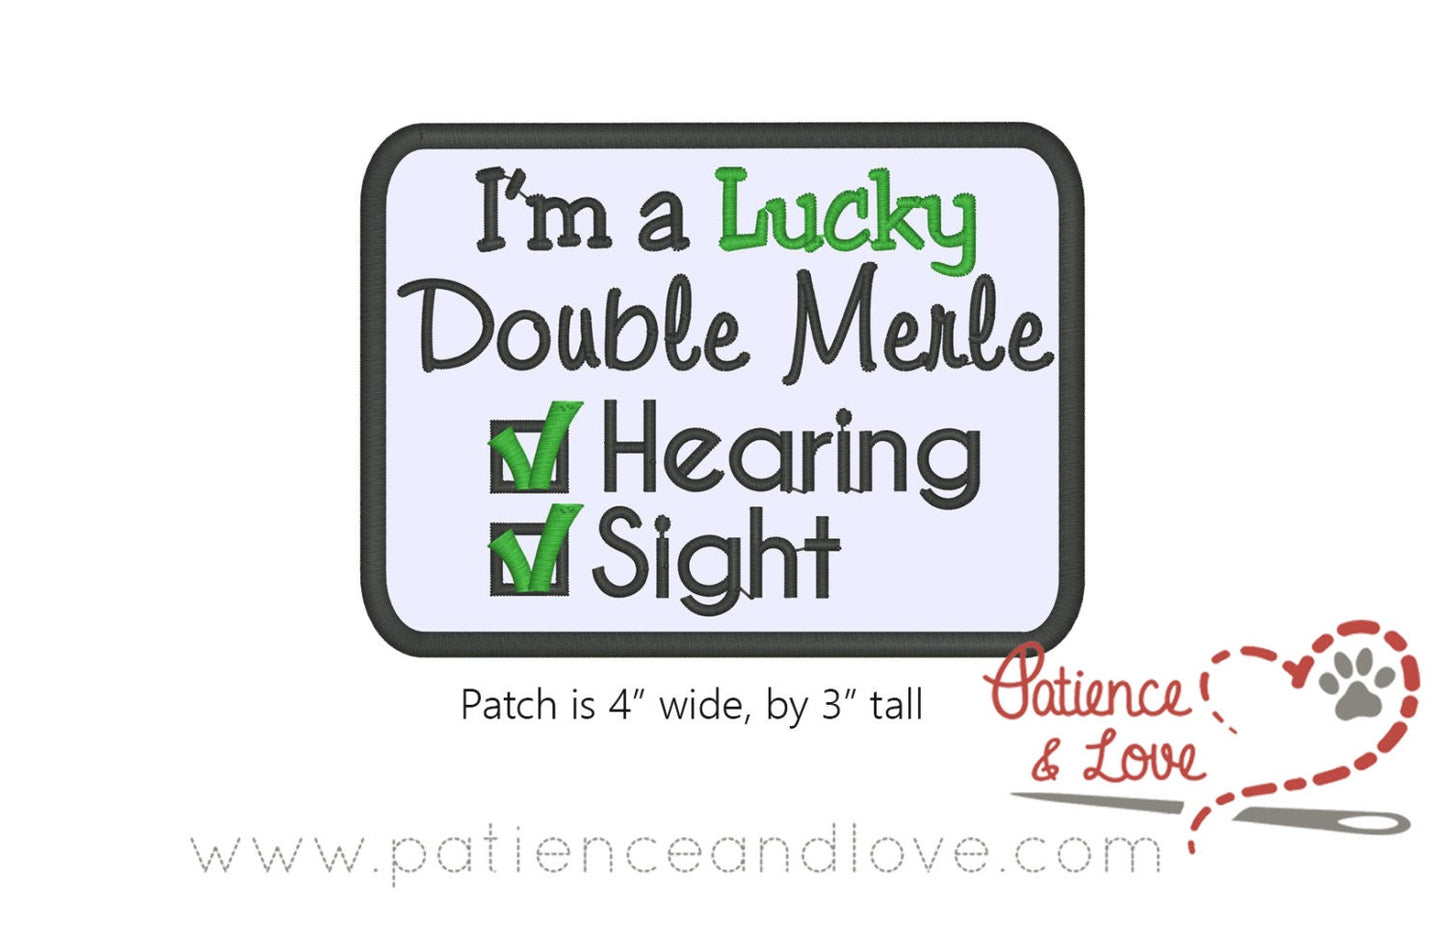 I'm a Lucky Double Merle, Hearing, sight, 4 x 3 inch rectangular patch